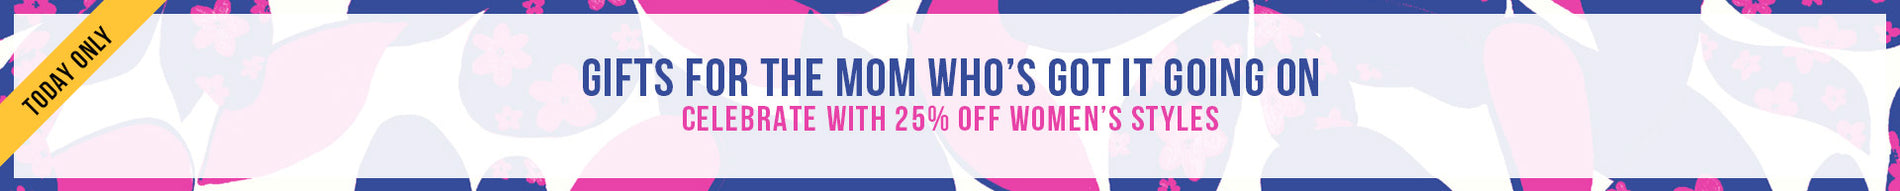 25% OFF WOMEN'S - APPLIED AT CART